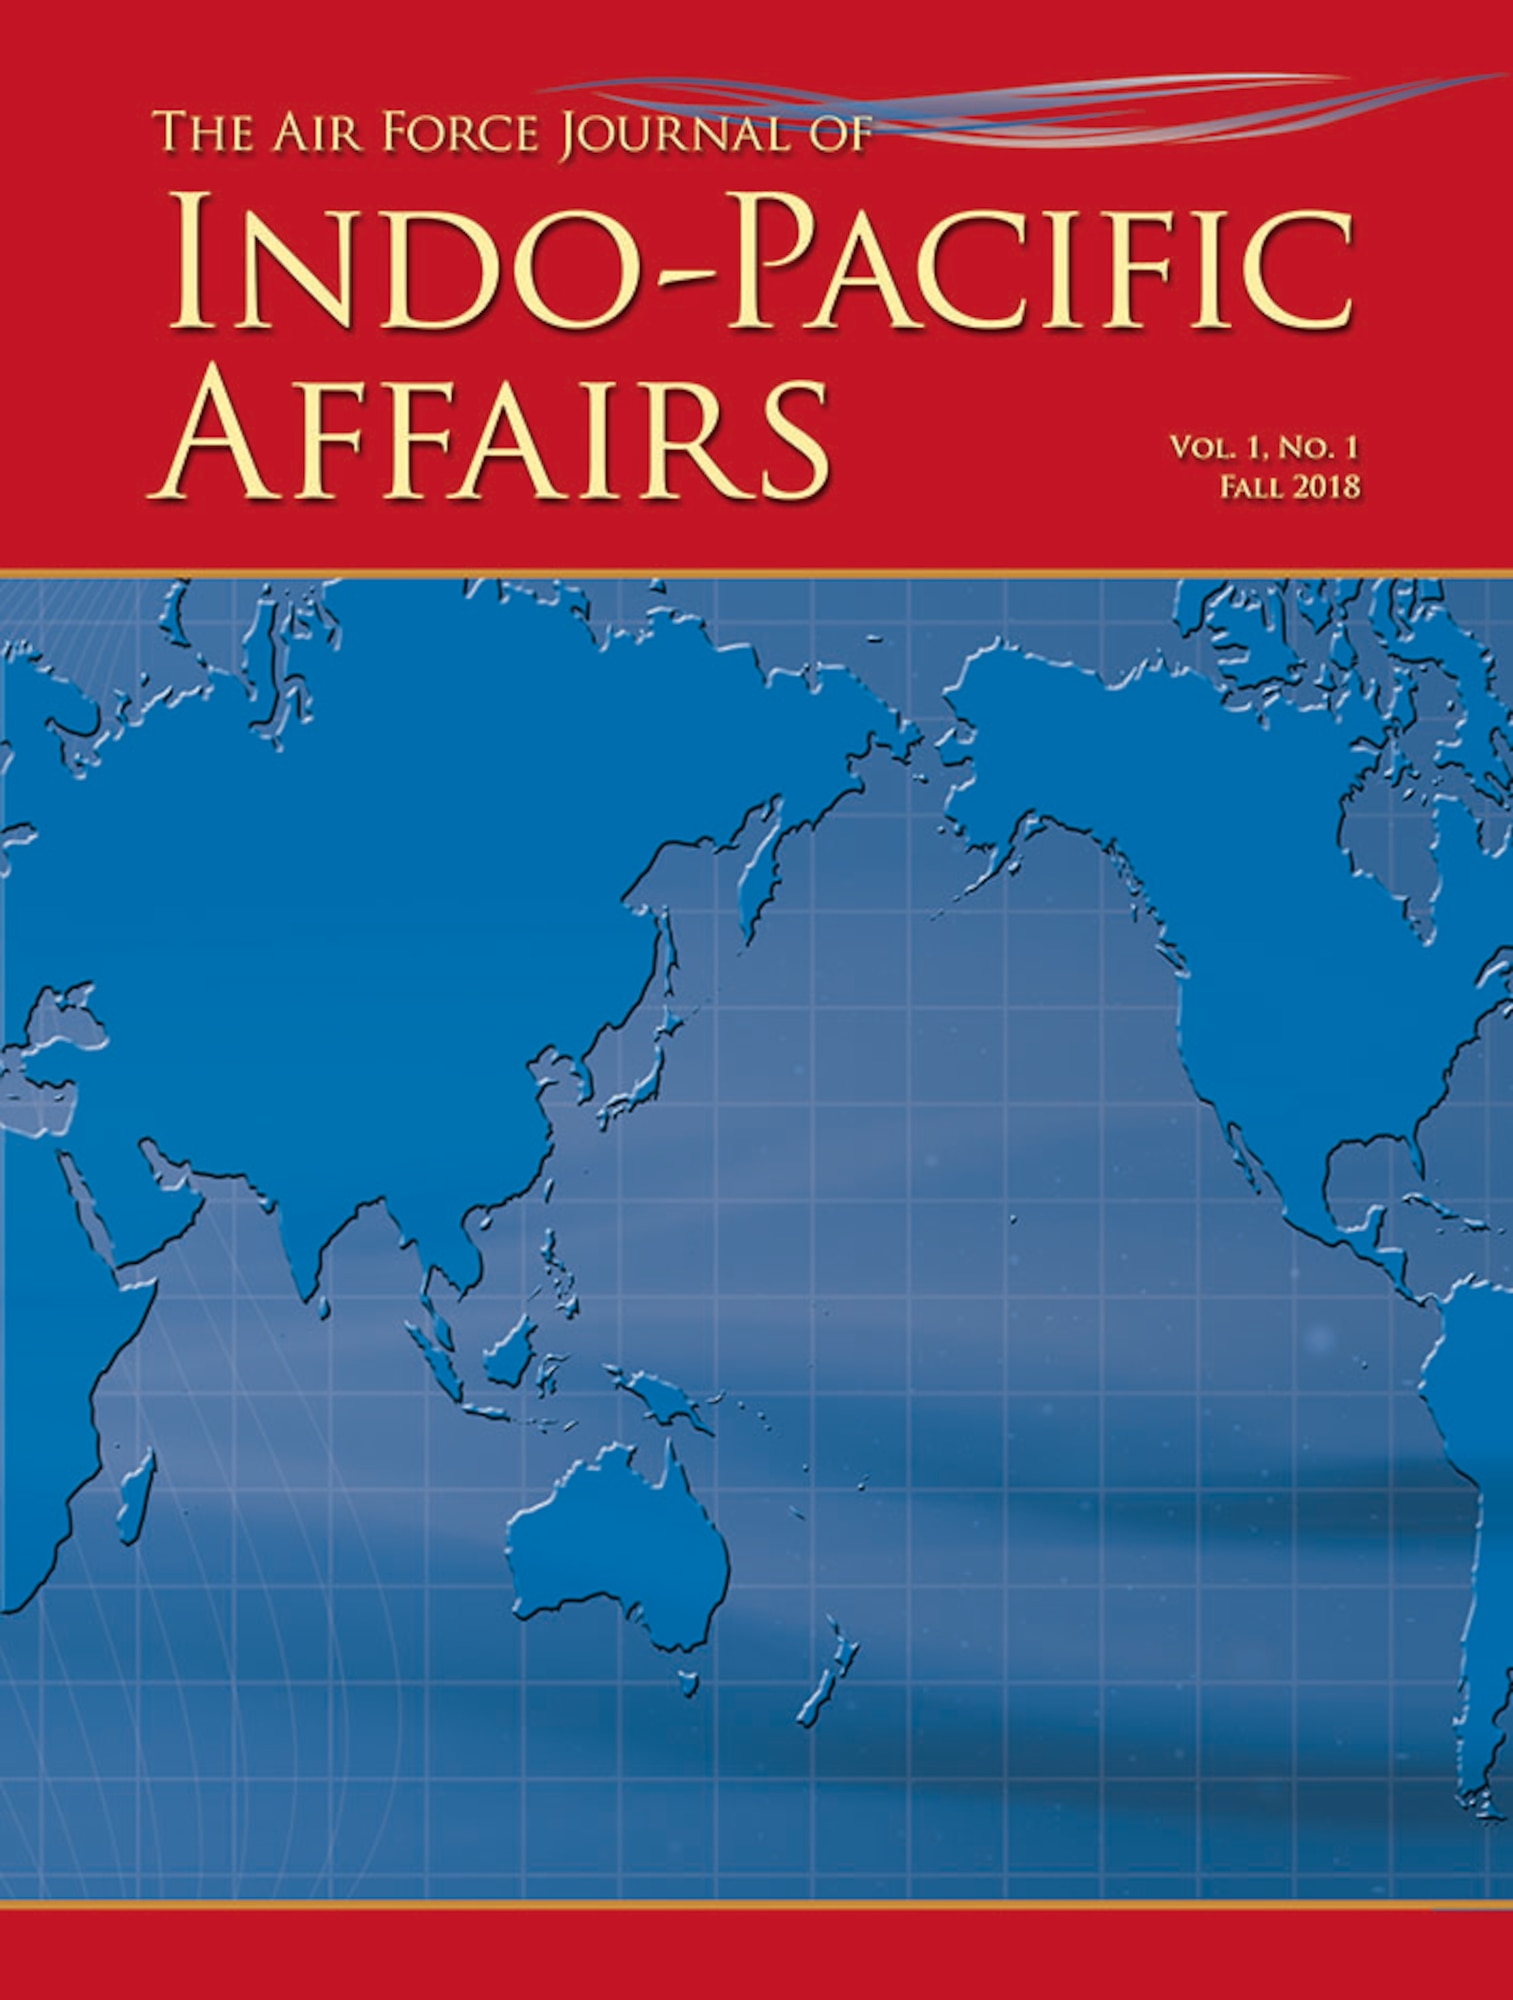 Air University Press new journal announcement: Air Force Journal of Indo-Pacific Affairs (JIPA)